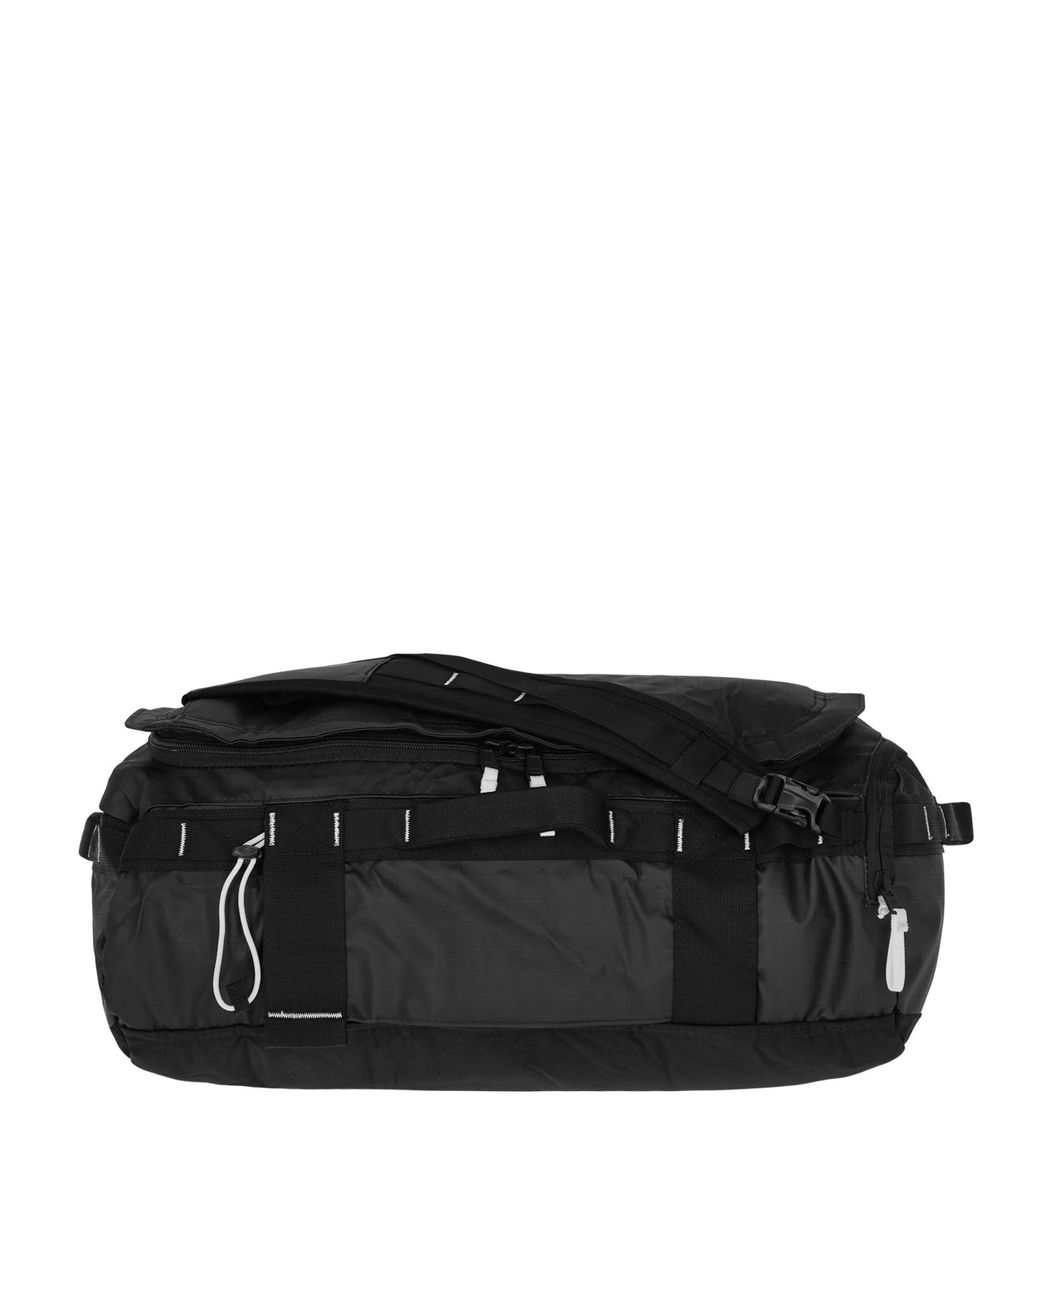 The North Face Base Camp Voyager 32l Duffel Bag in Black for Men - Lyst